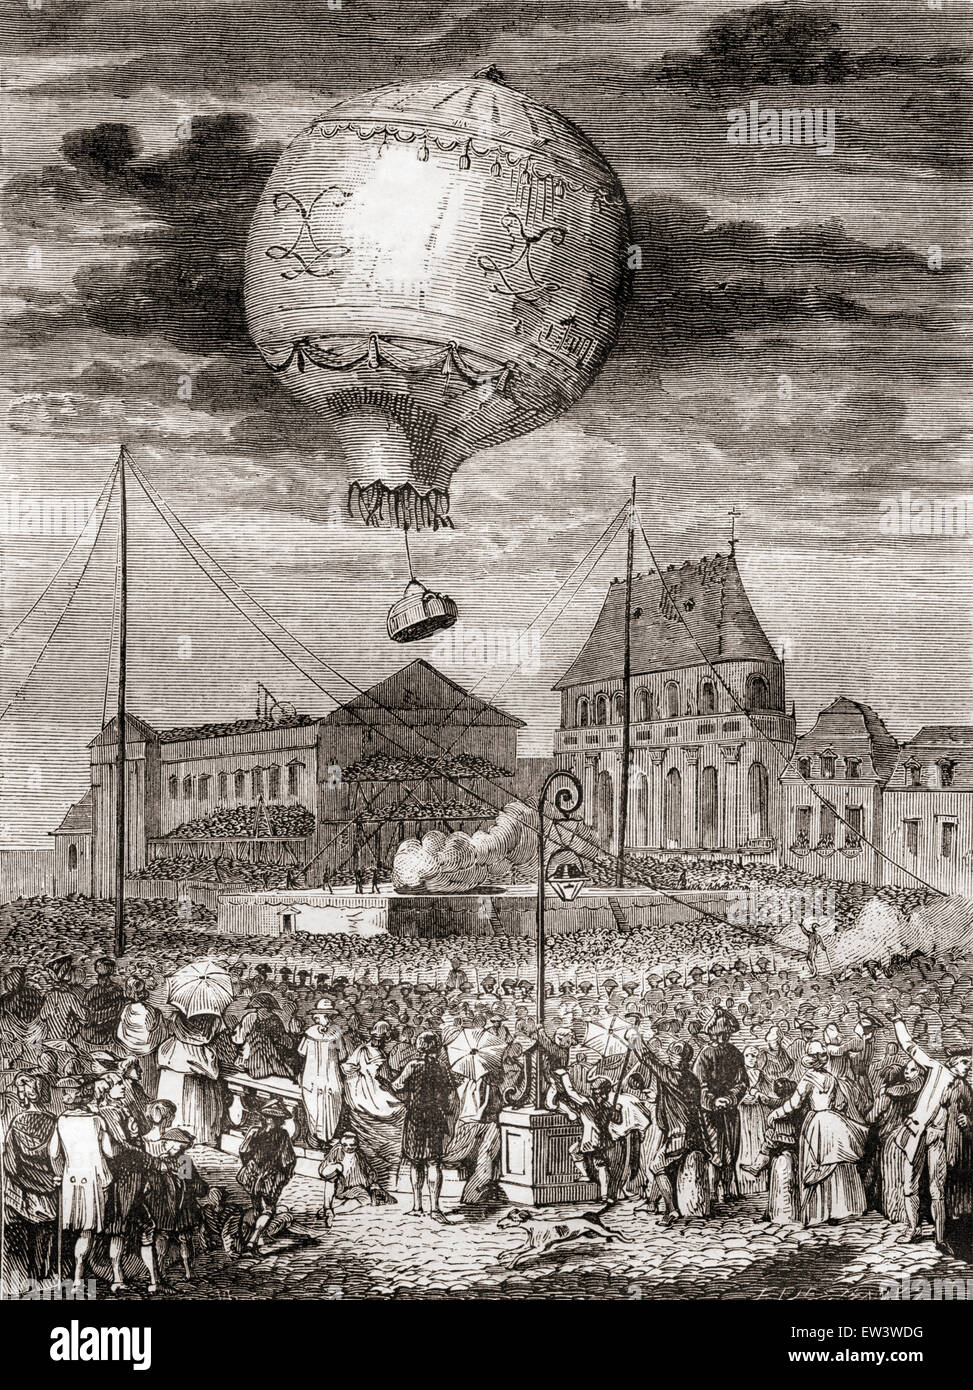 The flight of the Aérostat Réveillon on 19th of September 1783 by the Montgolfier brothers at Versailles, France, before King Louis XVI of France and Queen Marie Antoinette. Stock Photo